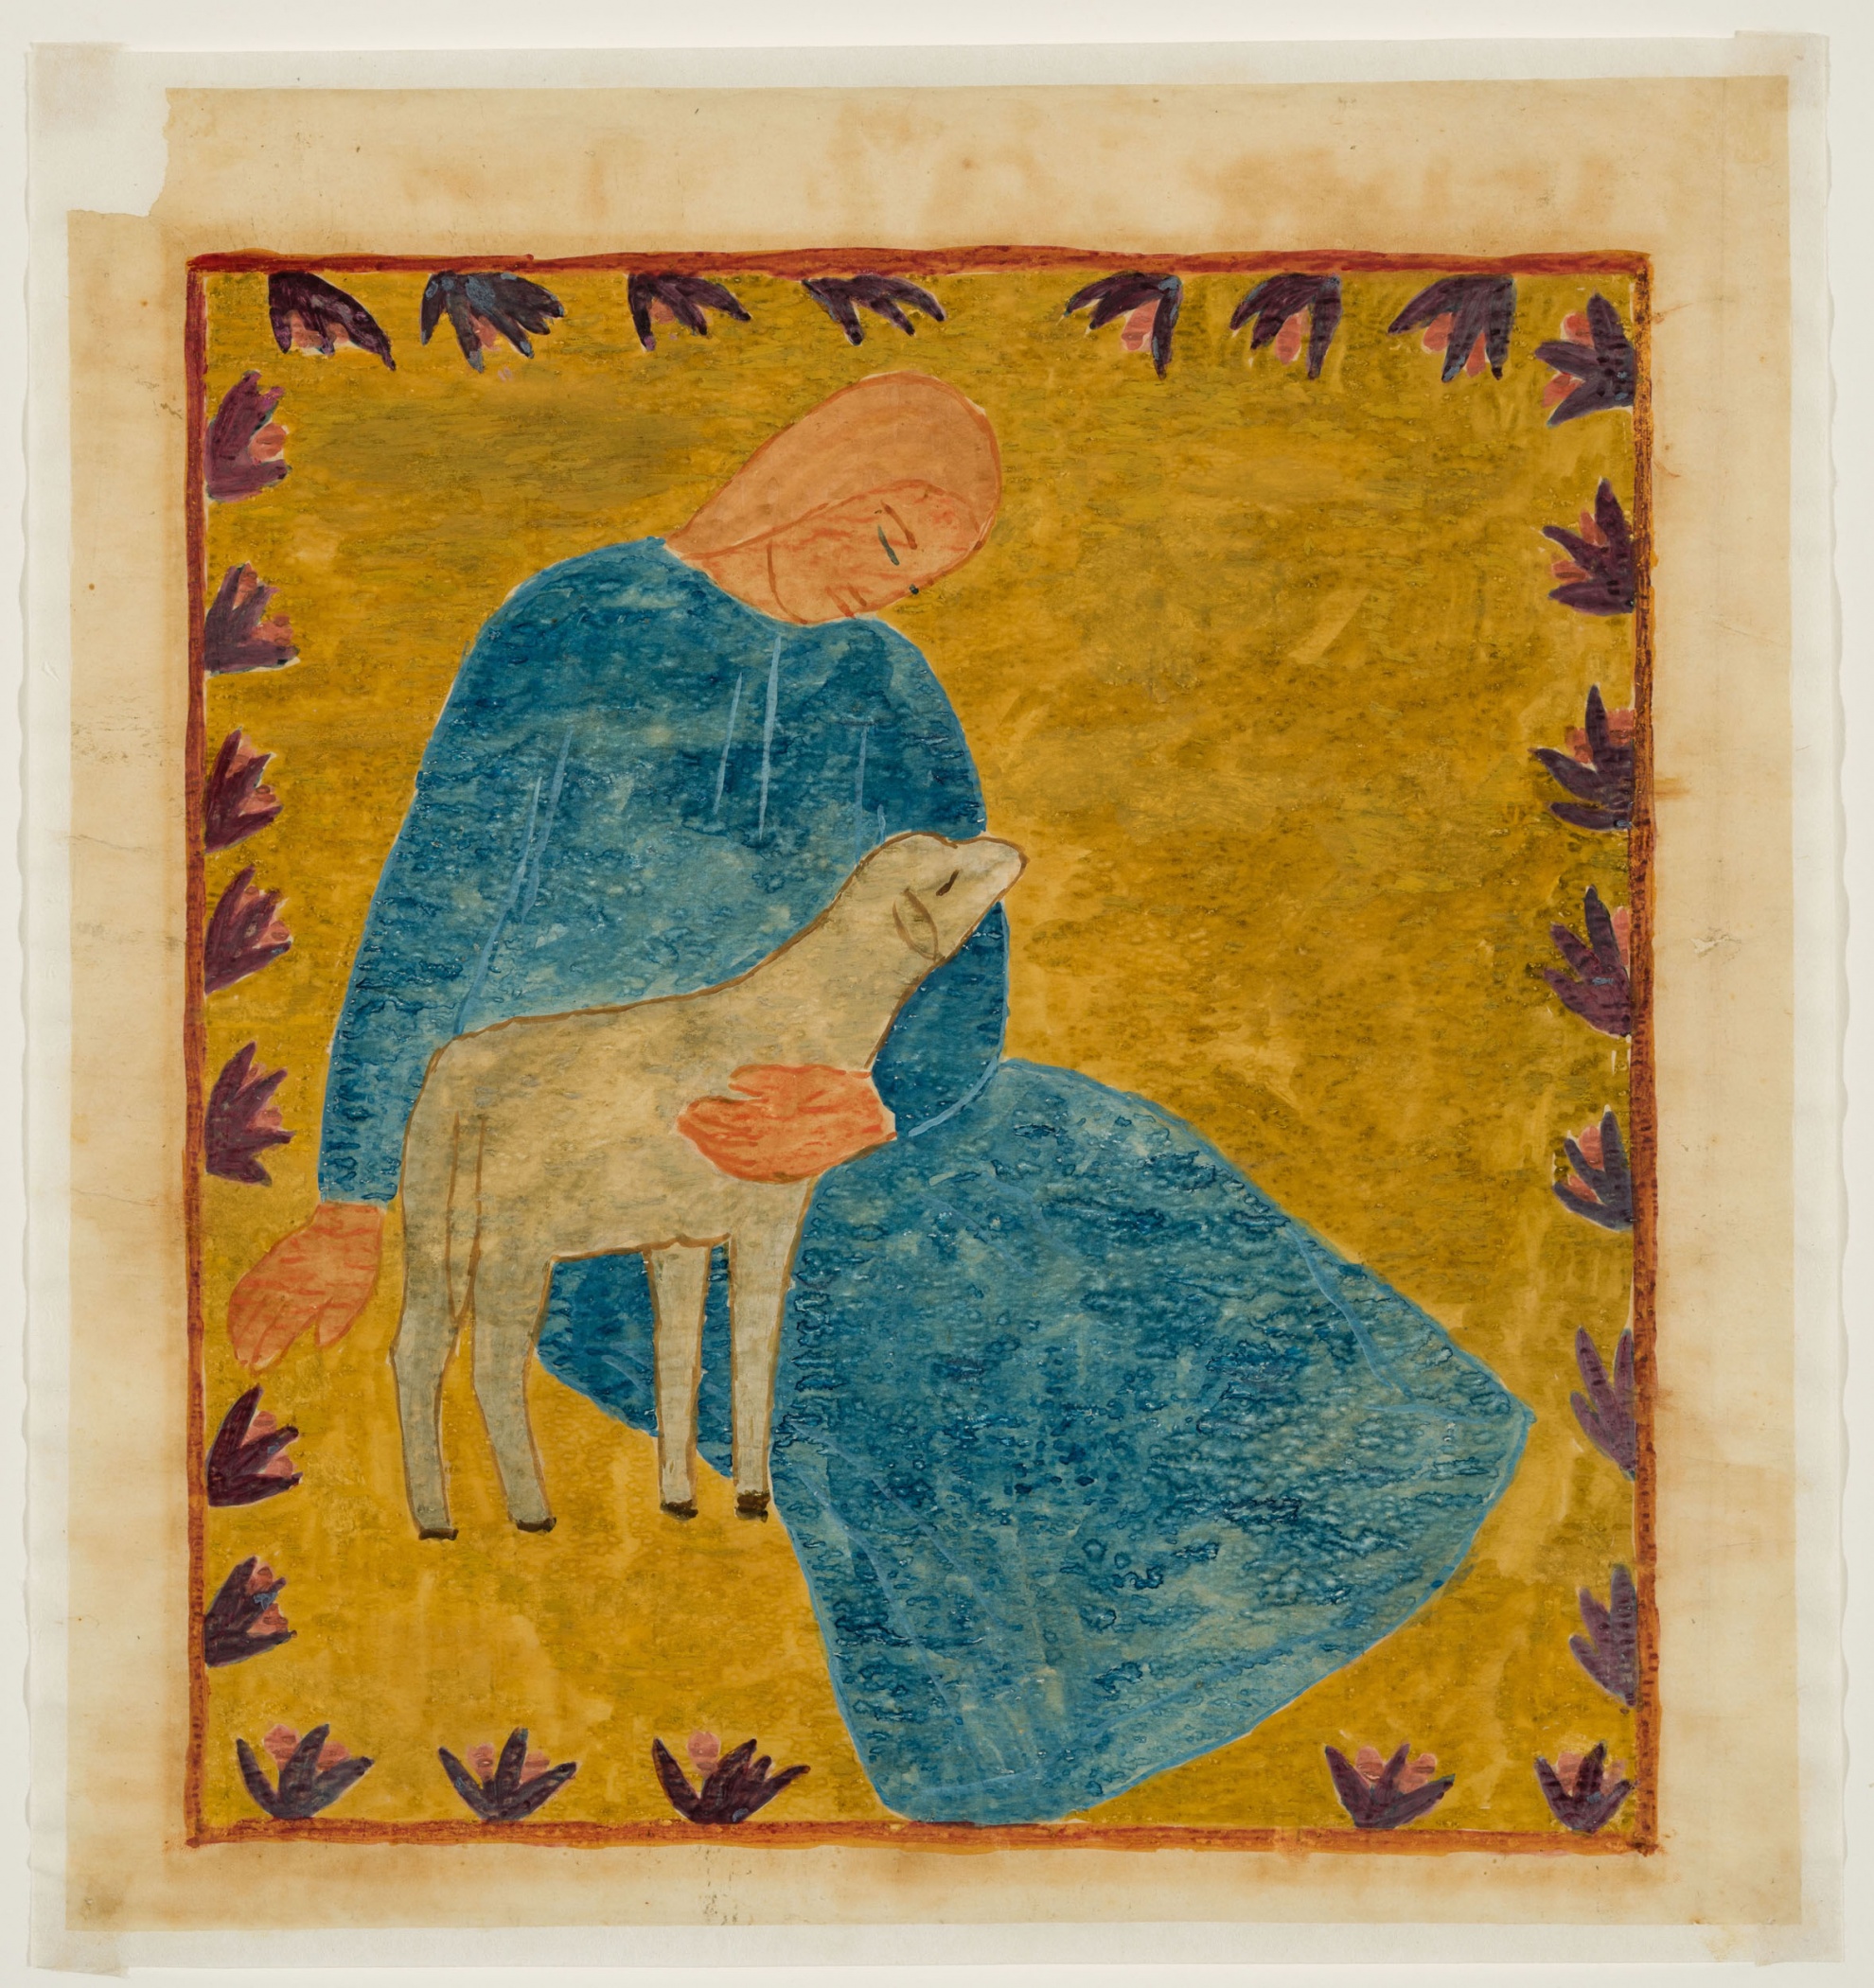 color sketch for the tapestry Bárányos II (With a lamb II), (known as “Woman with Lamb”)
(The Salgo Trust for Education CC BY-NC-SA)